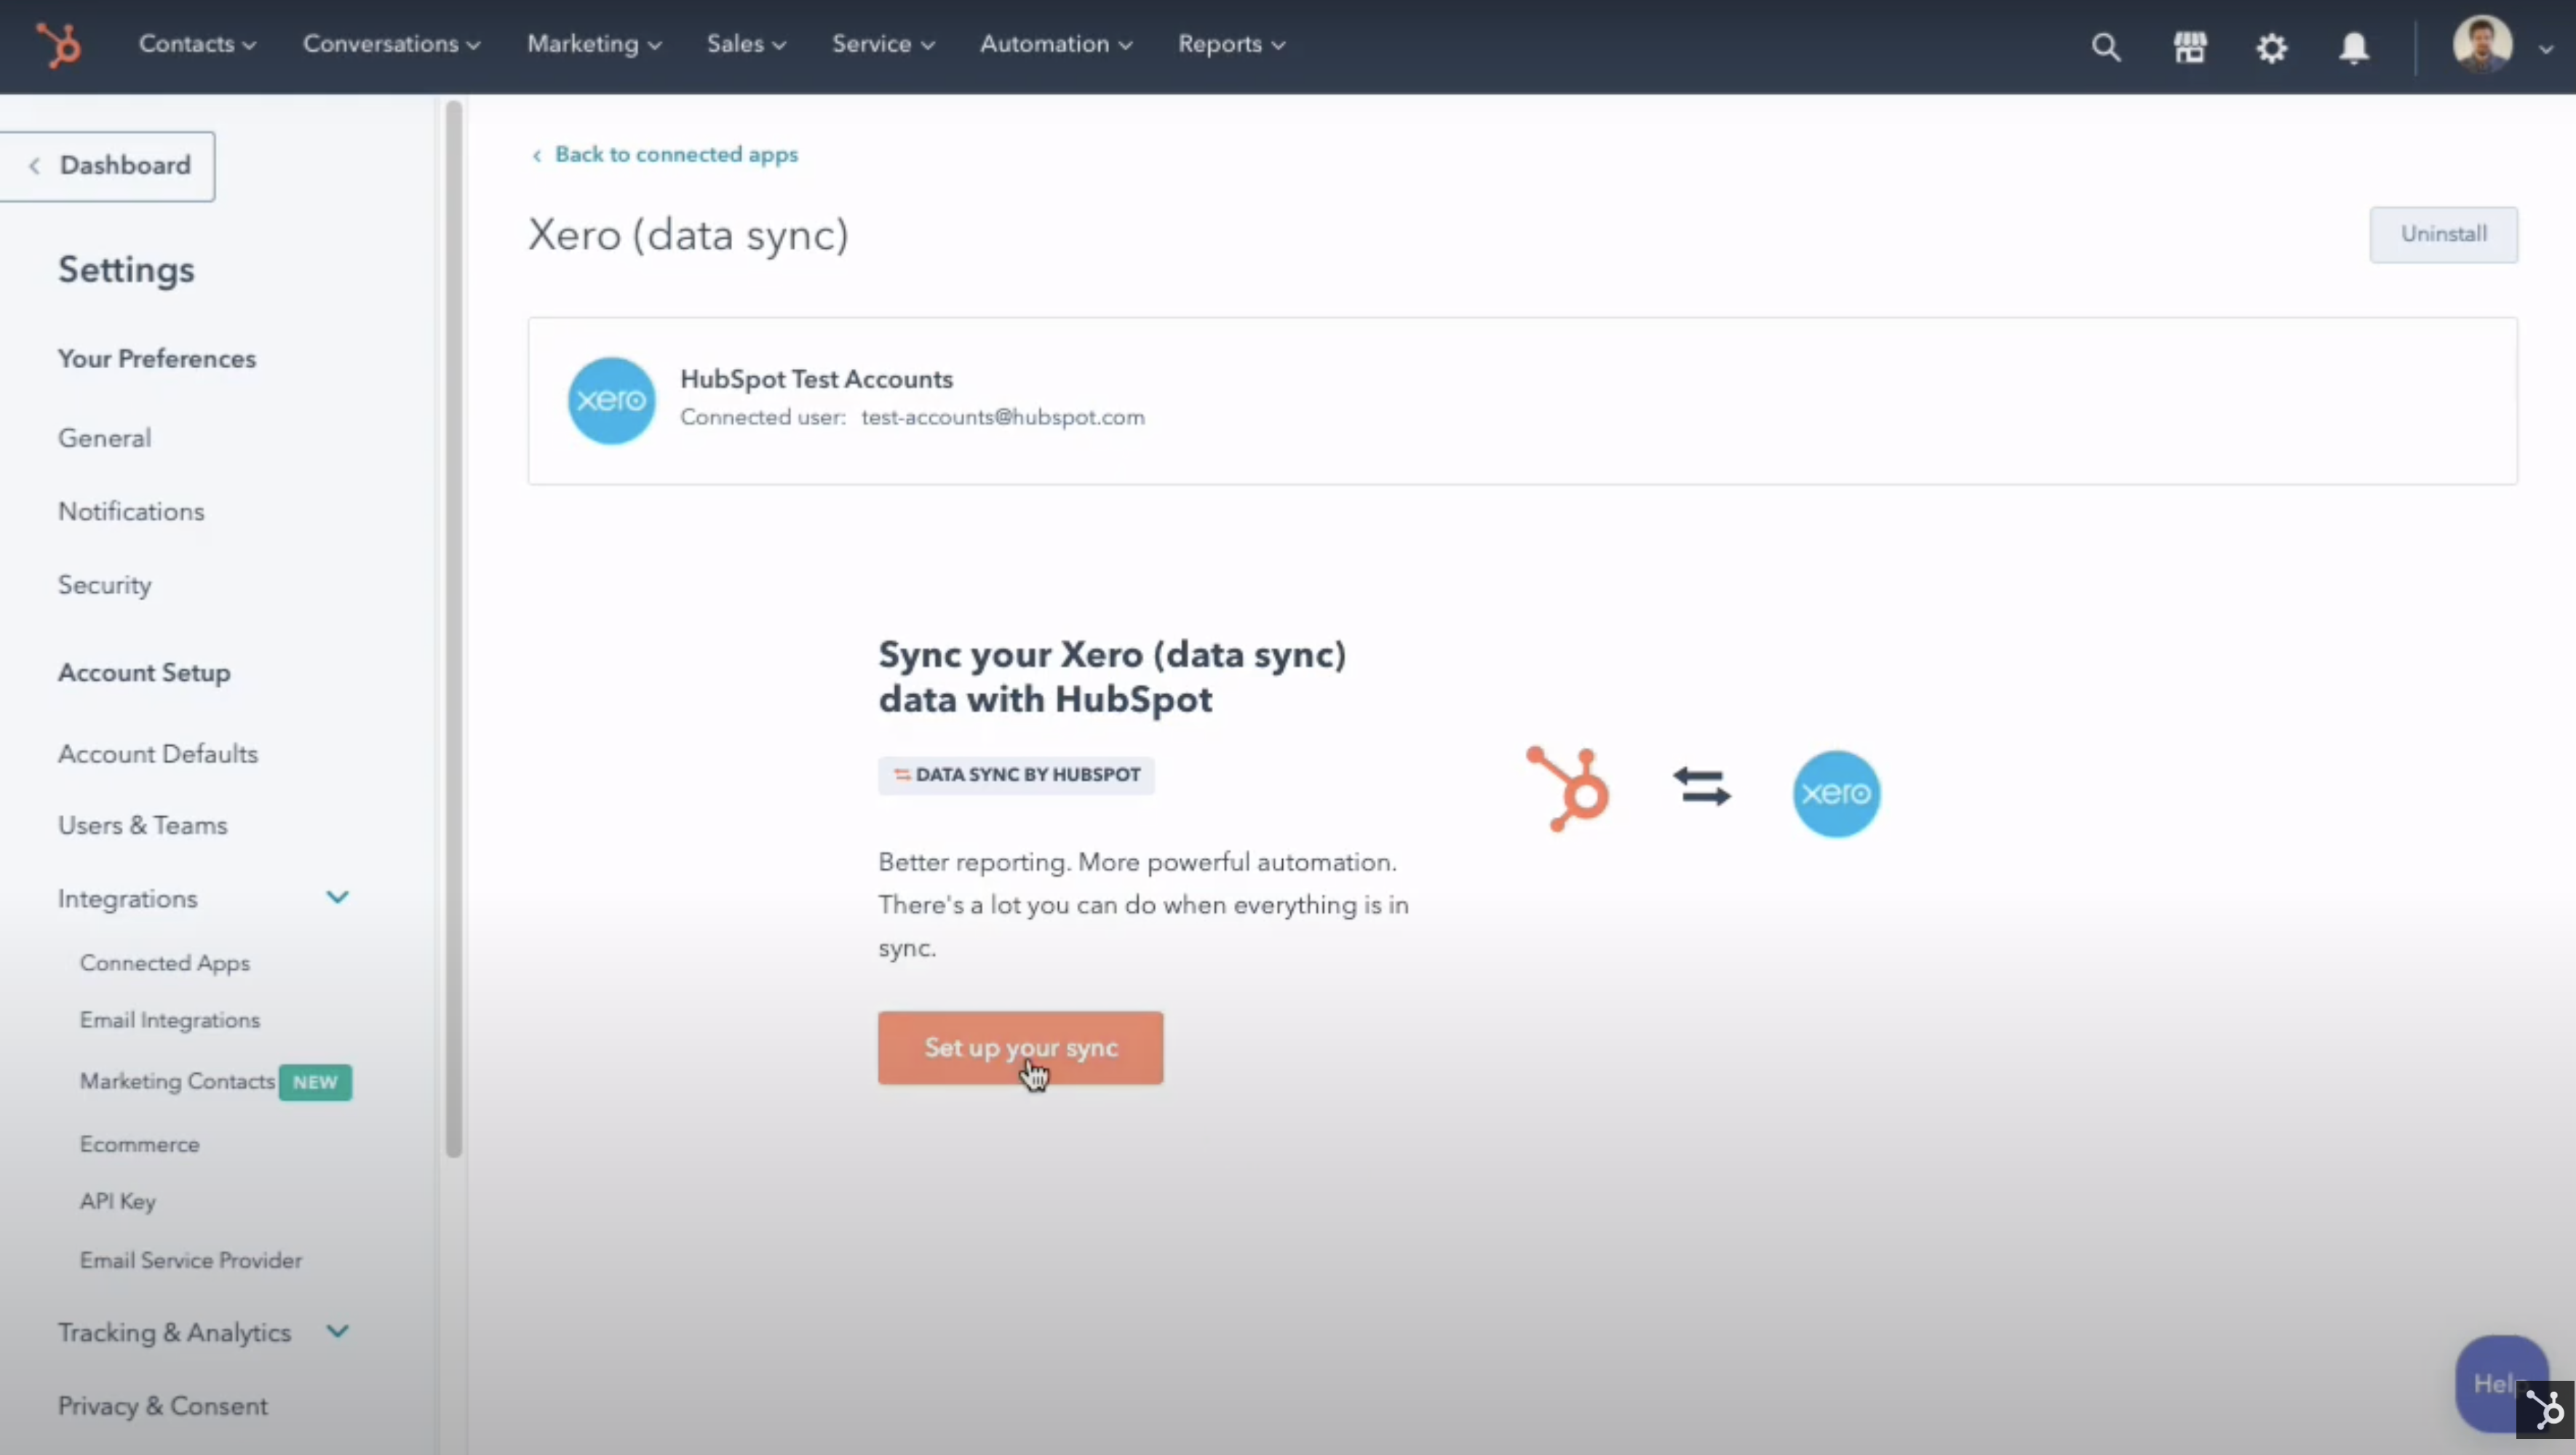 Data sync by HubSpot